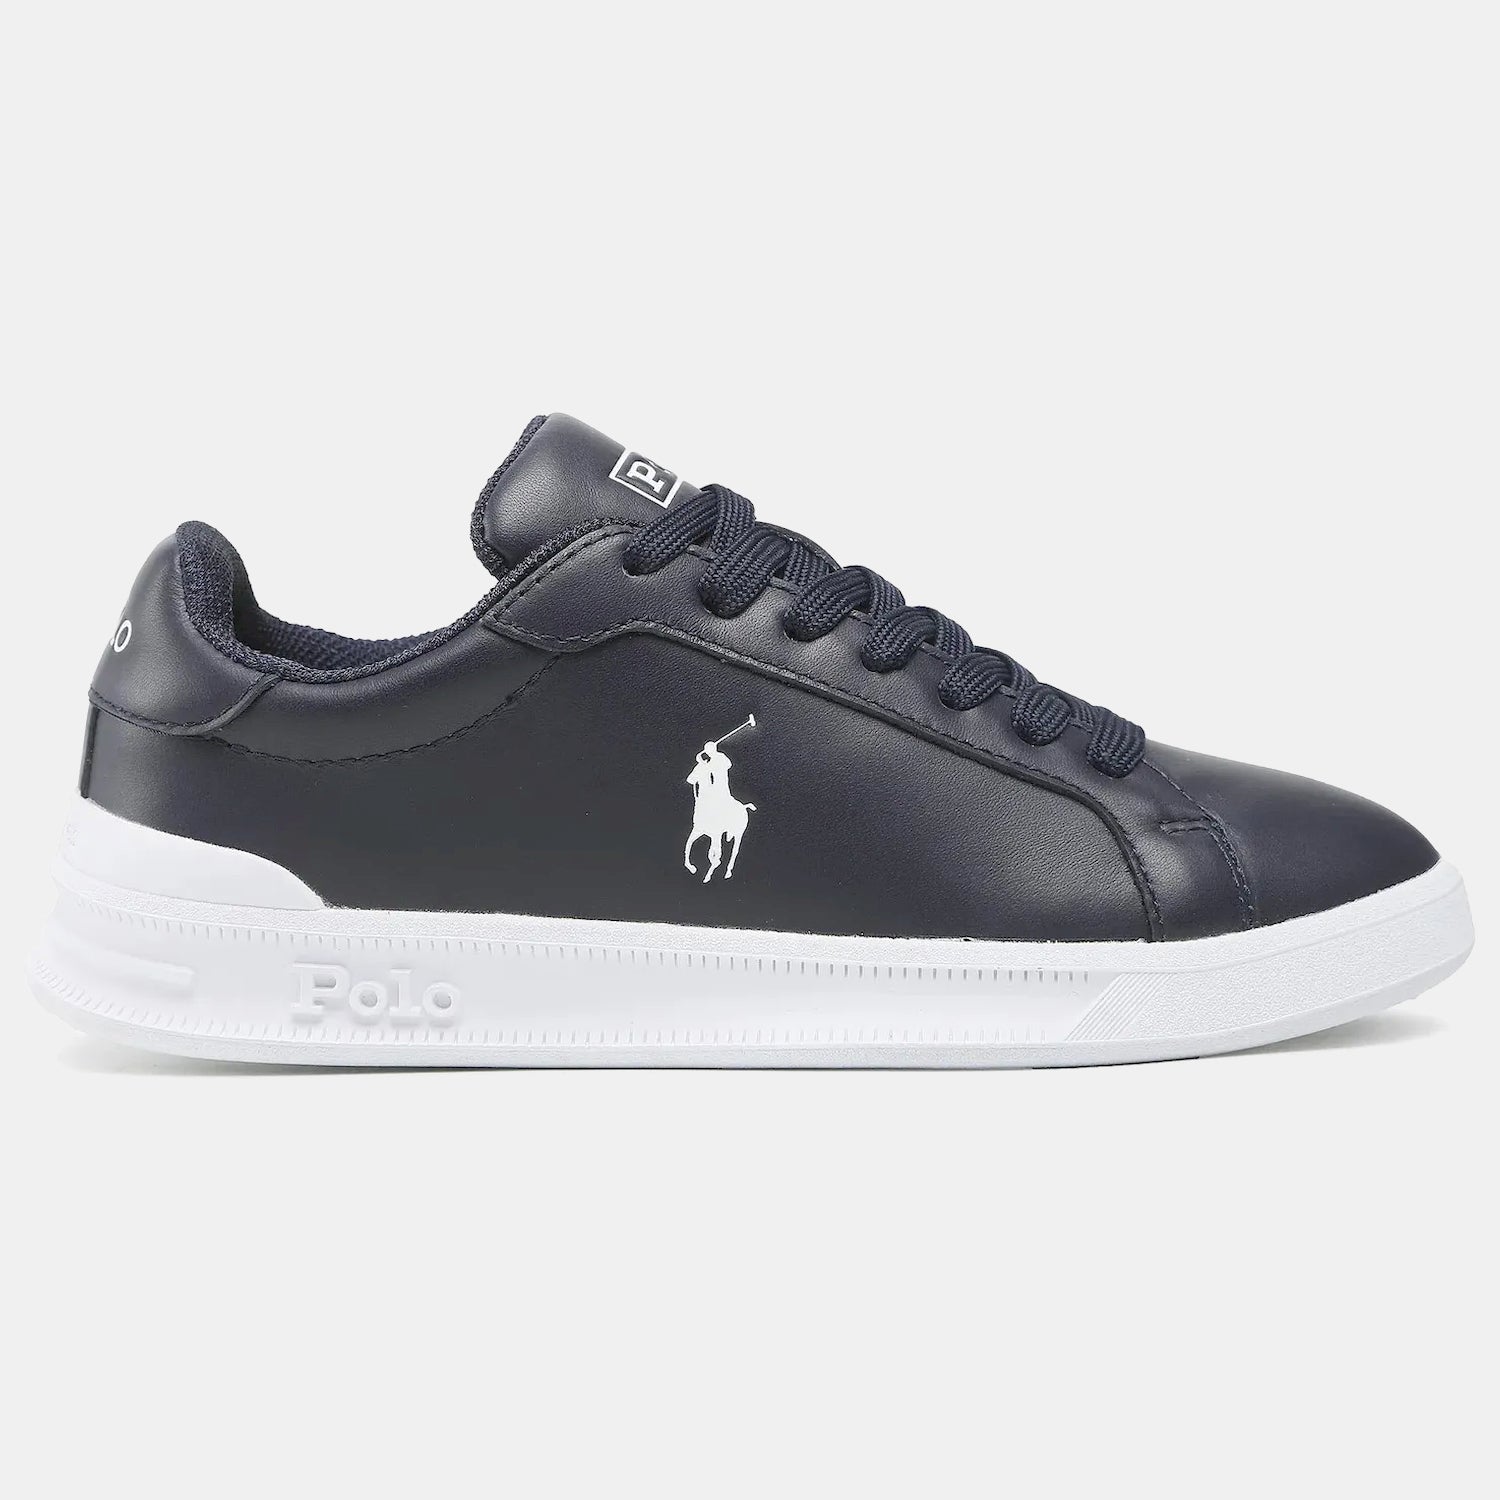 Ralph Lauren Sapatilhas Sneakers Shoes Hrtctii Sk Ath Navy White Navy Branco_shot1